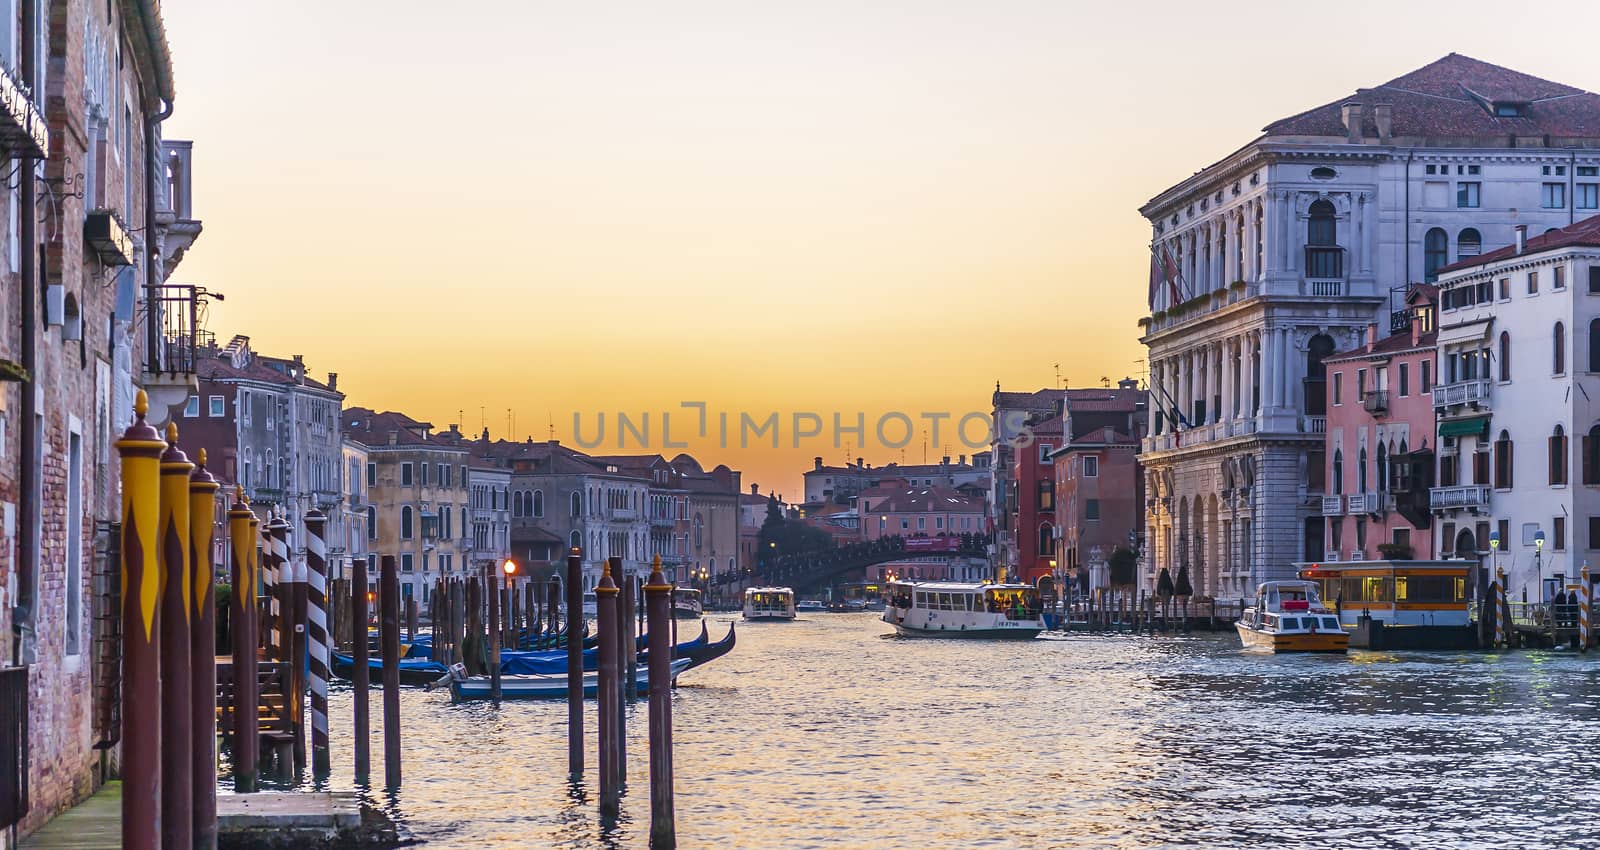 The Grand Canal of Venice is the main artery of the city, and is 3.8 kilometers long.